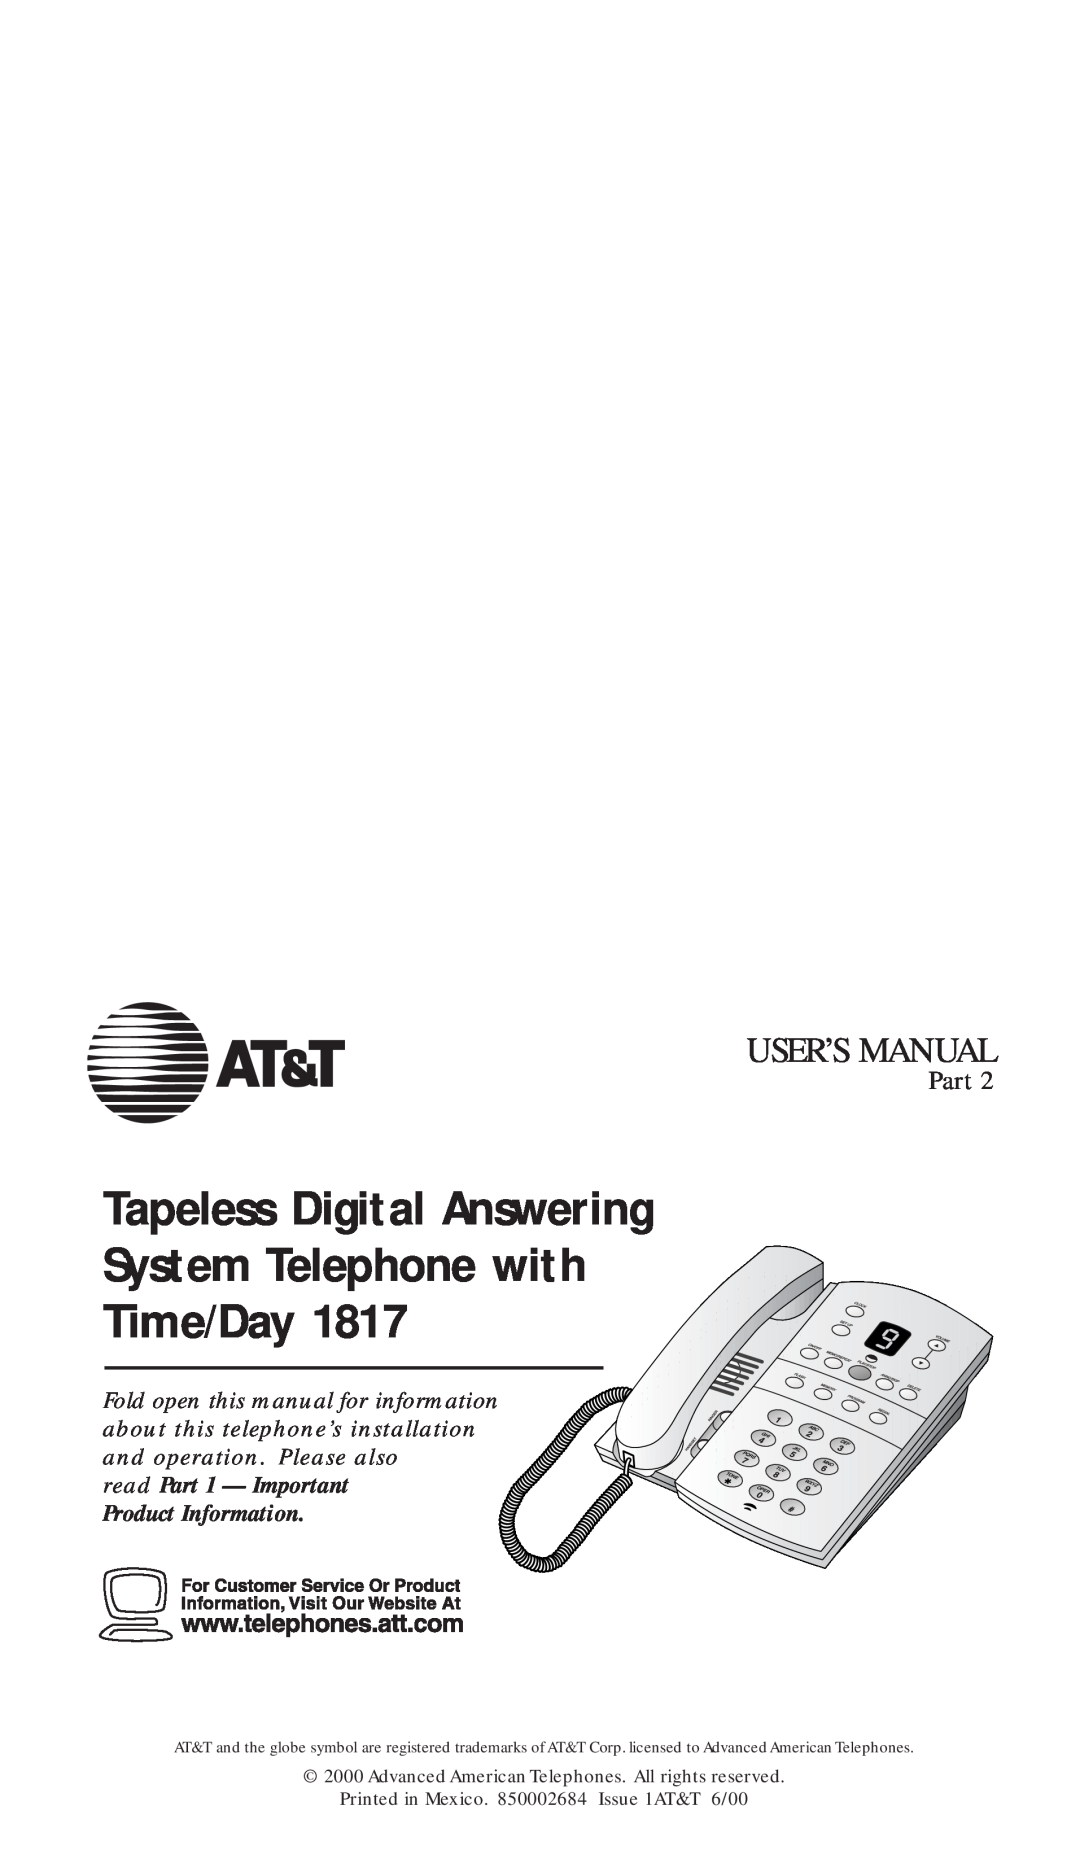 AT&T 1817 user manual read Part 1 - Important Product Information, User’S Manual 